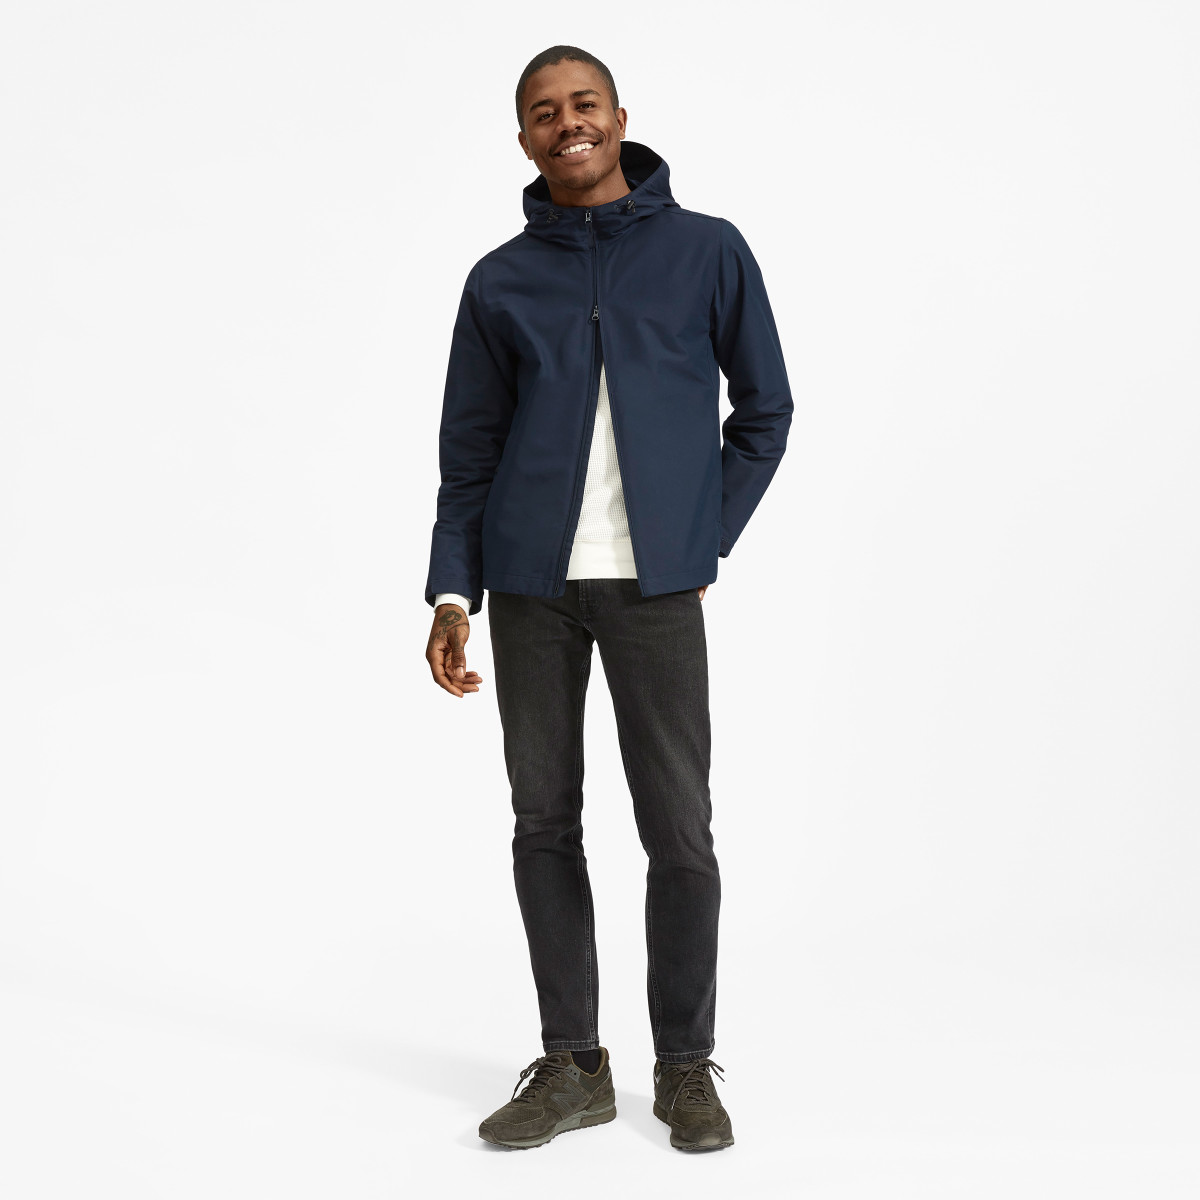 Everlane's new rain jacket is made from eighteen recycled plastic ...